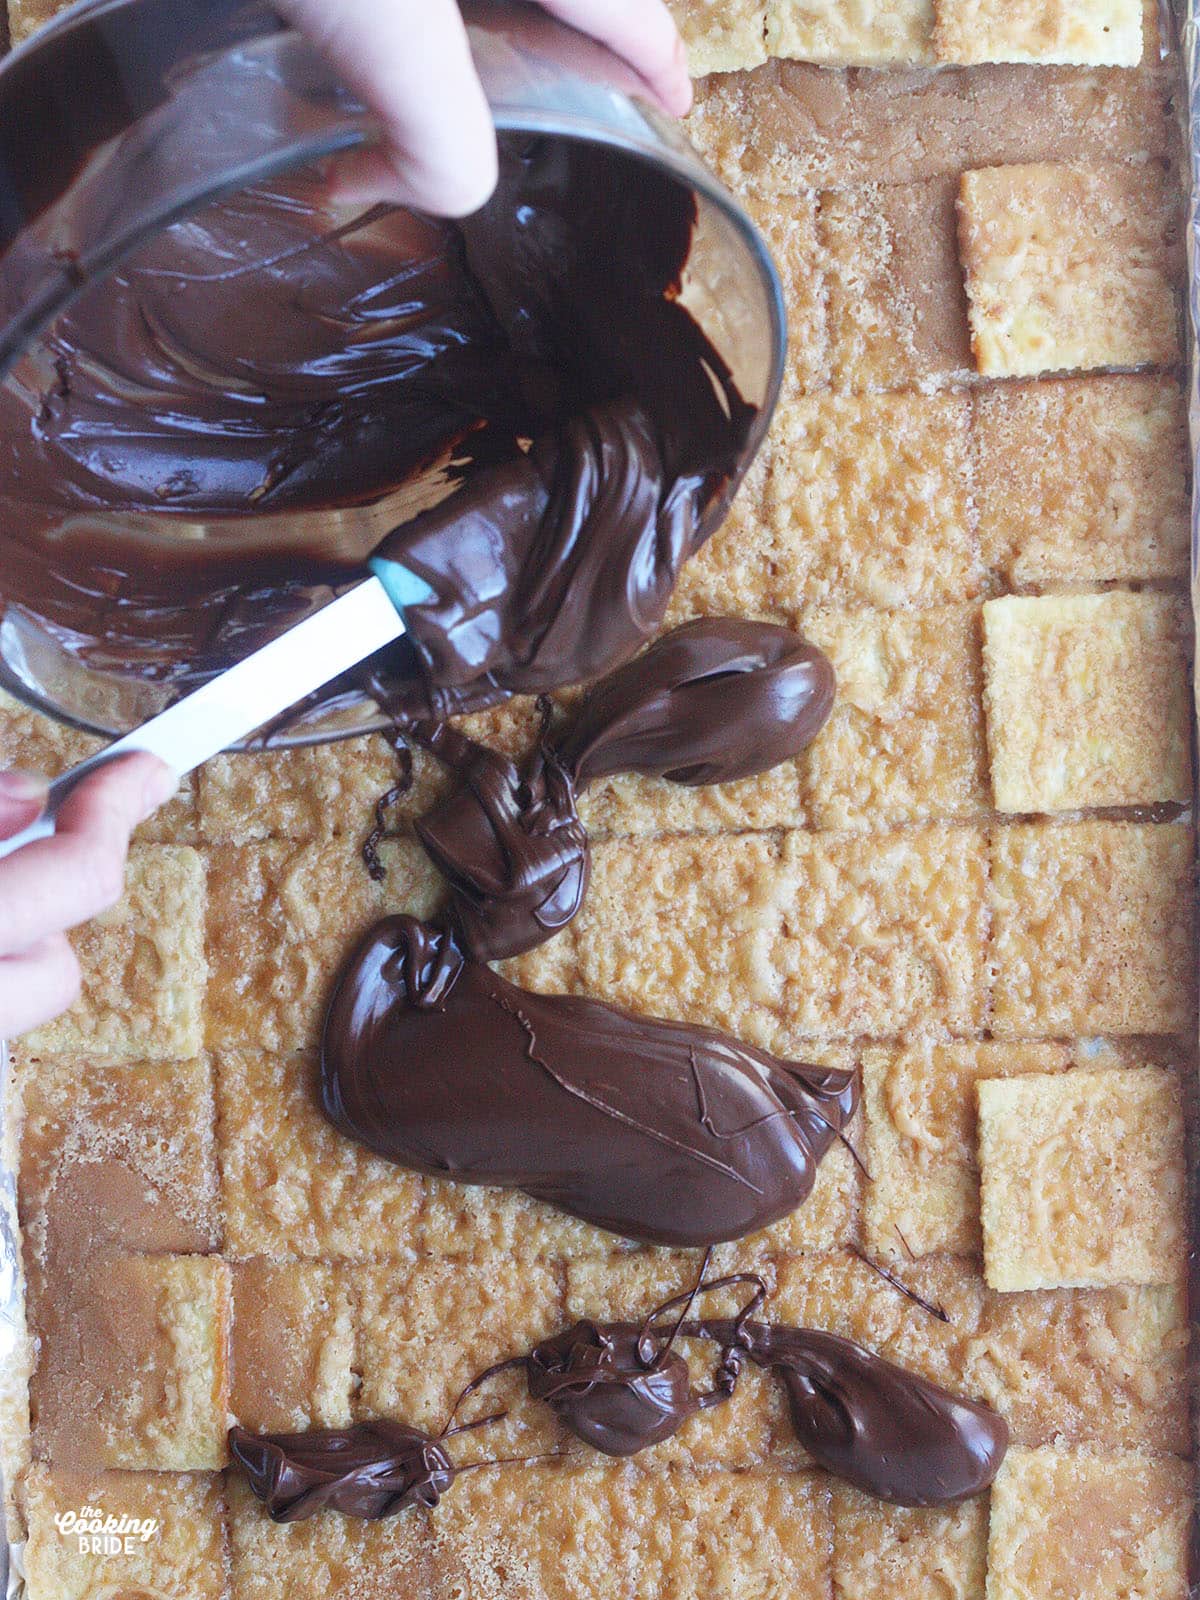 hand pouring melted chocolate from a glass bowl onto the toffee covered saltines